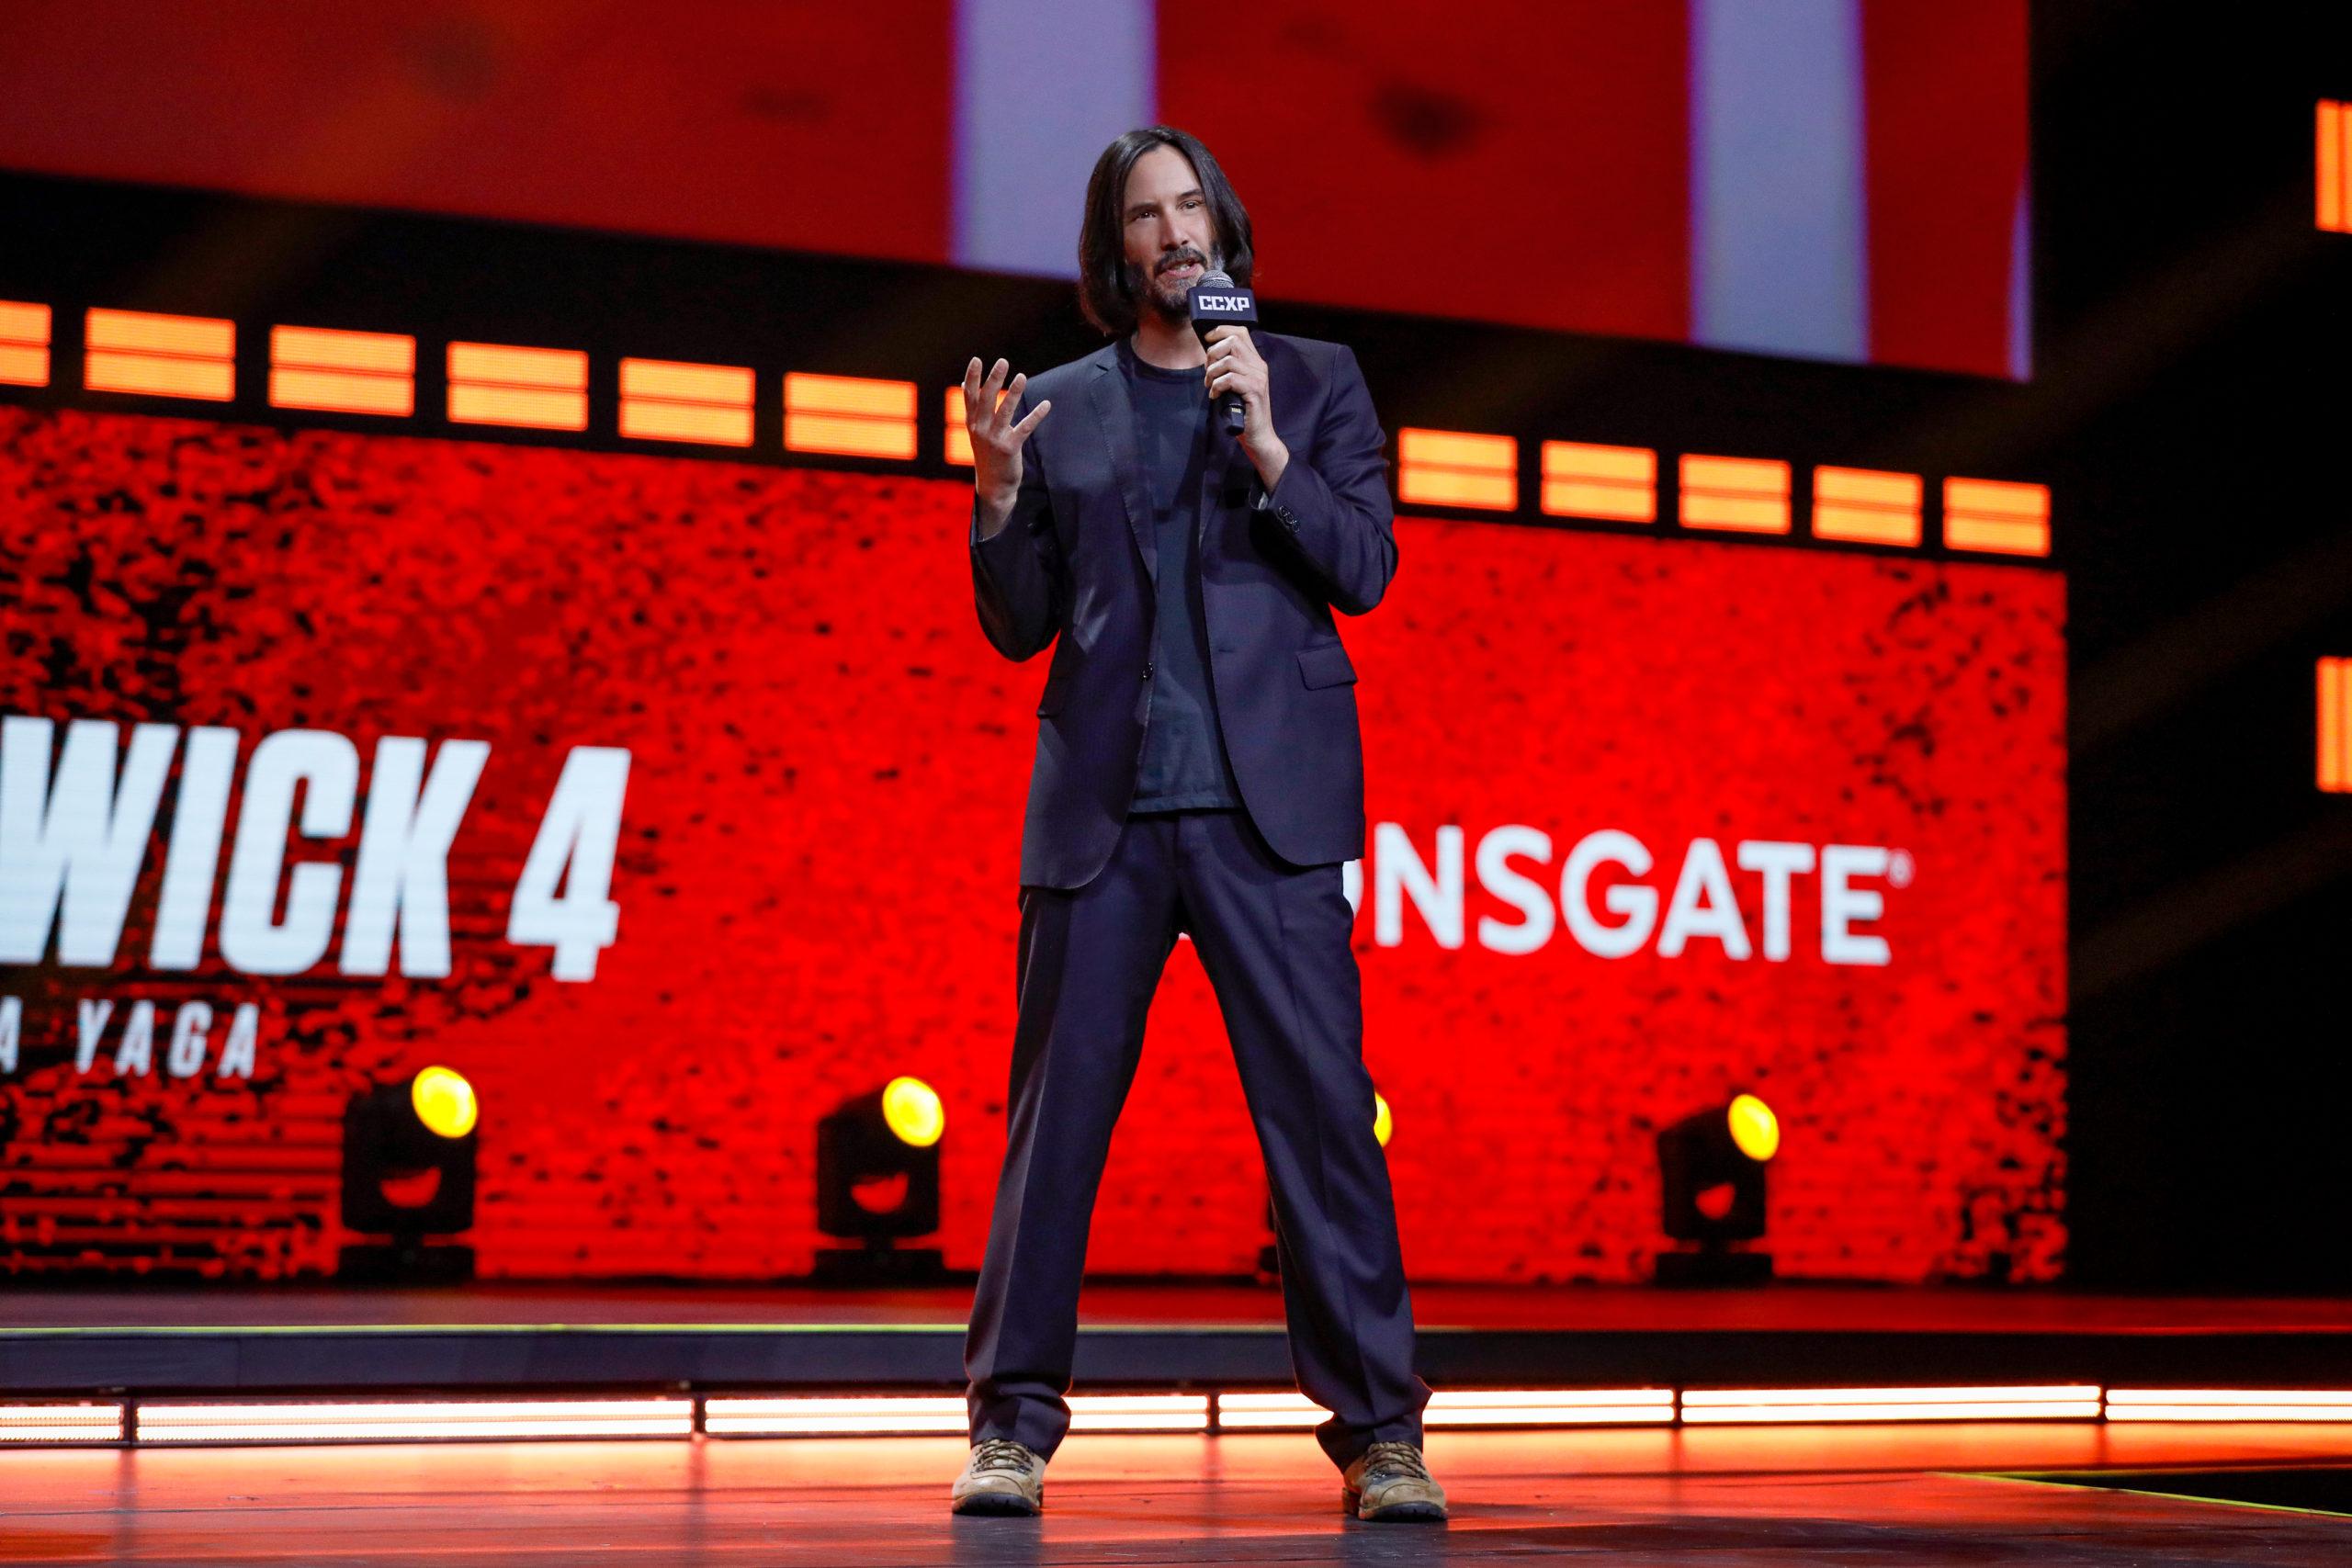 Keanu Reeves Gives Big Wick Energy at Brazil’s Ccxp With Action-Packed John Wick: Chapter 4 Panel – @JohnWickMovie #JohnWick4 #CCXP22